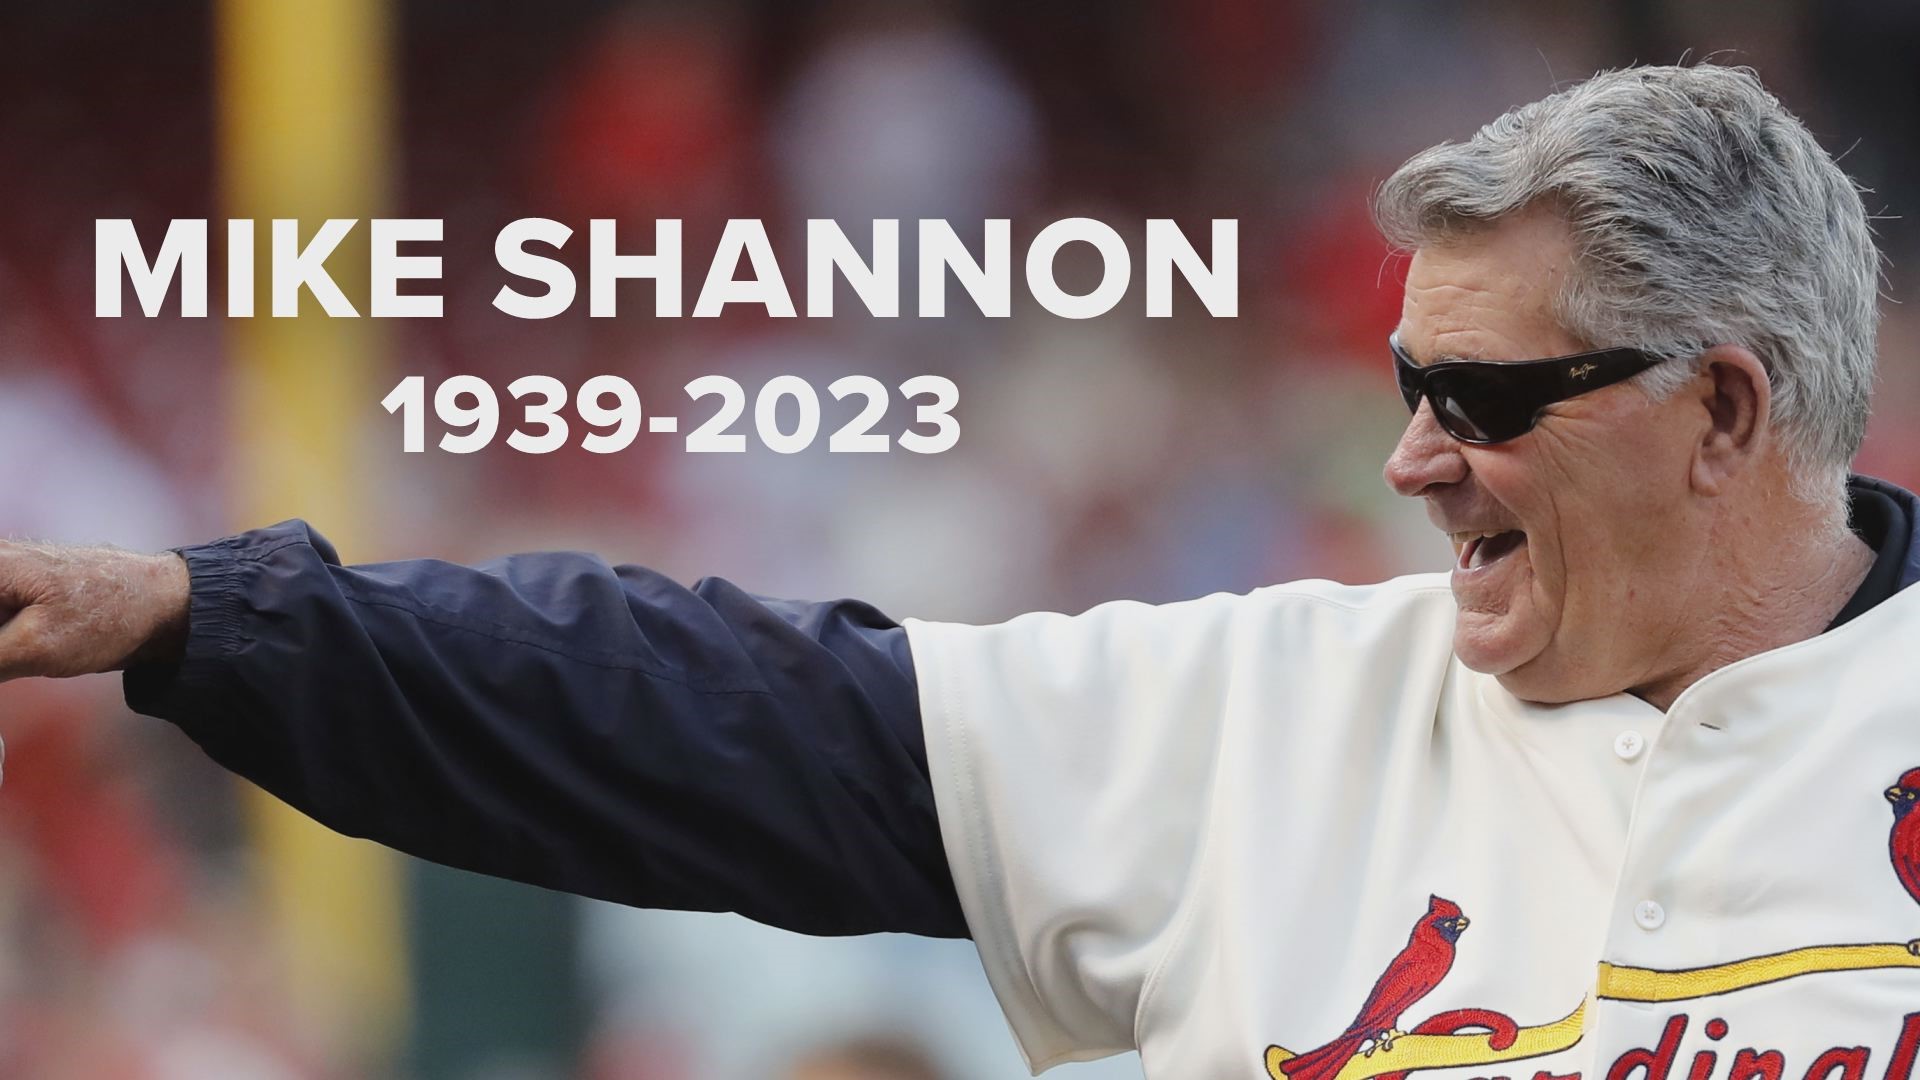 Completely Lost It”: Cardinals Legend Receives Emotional